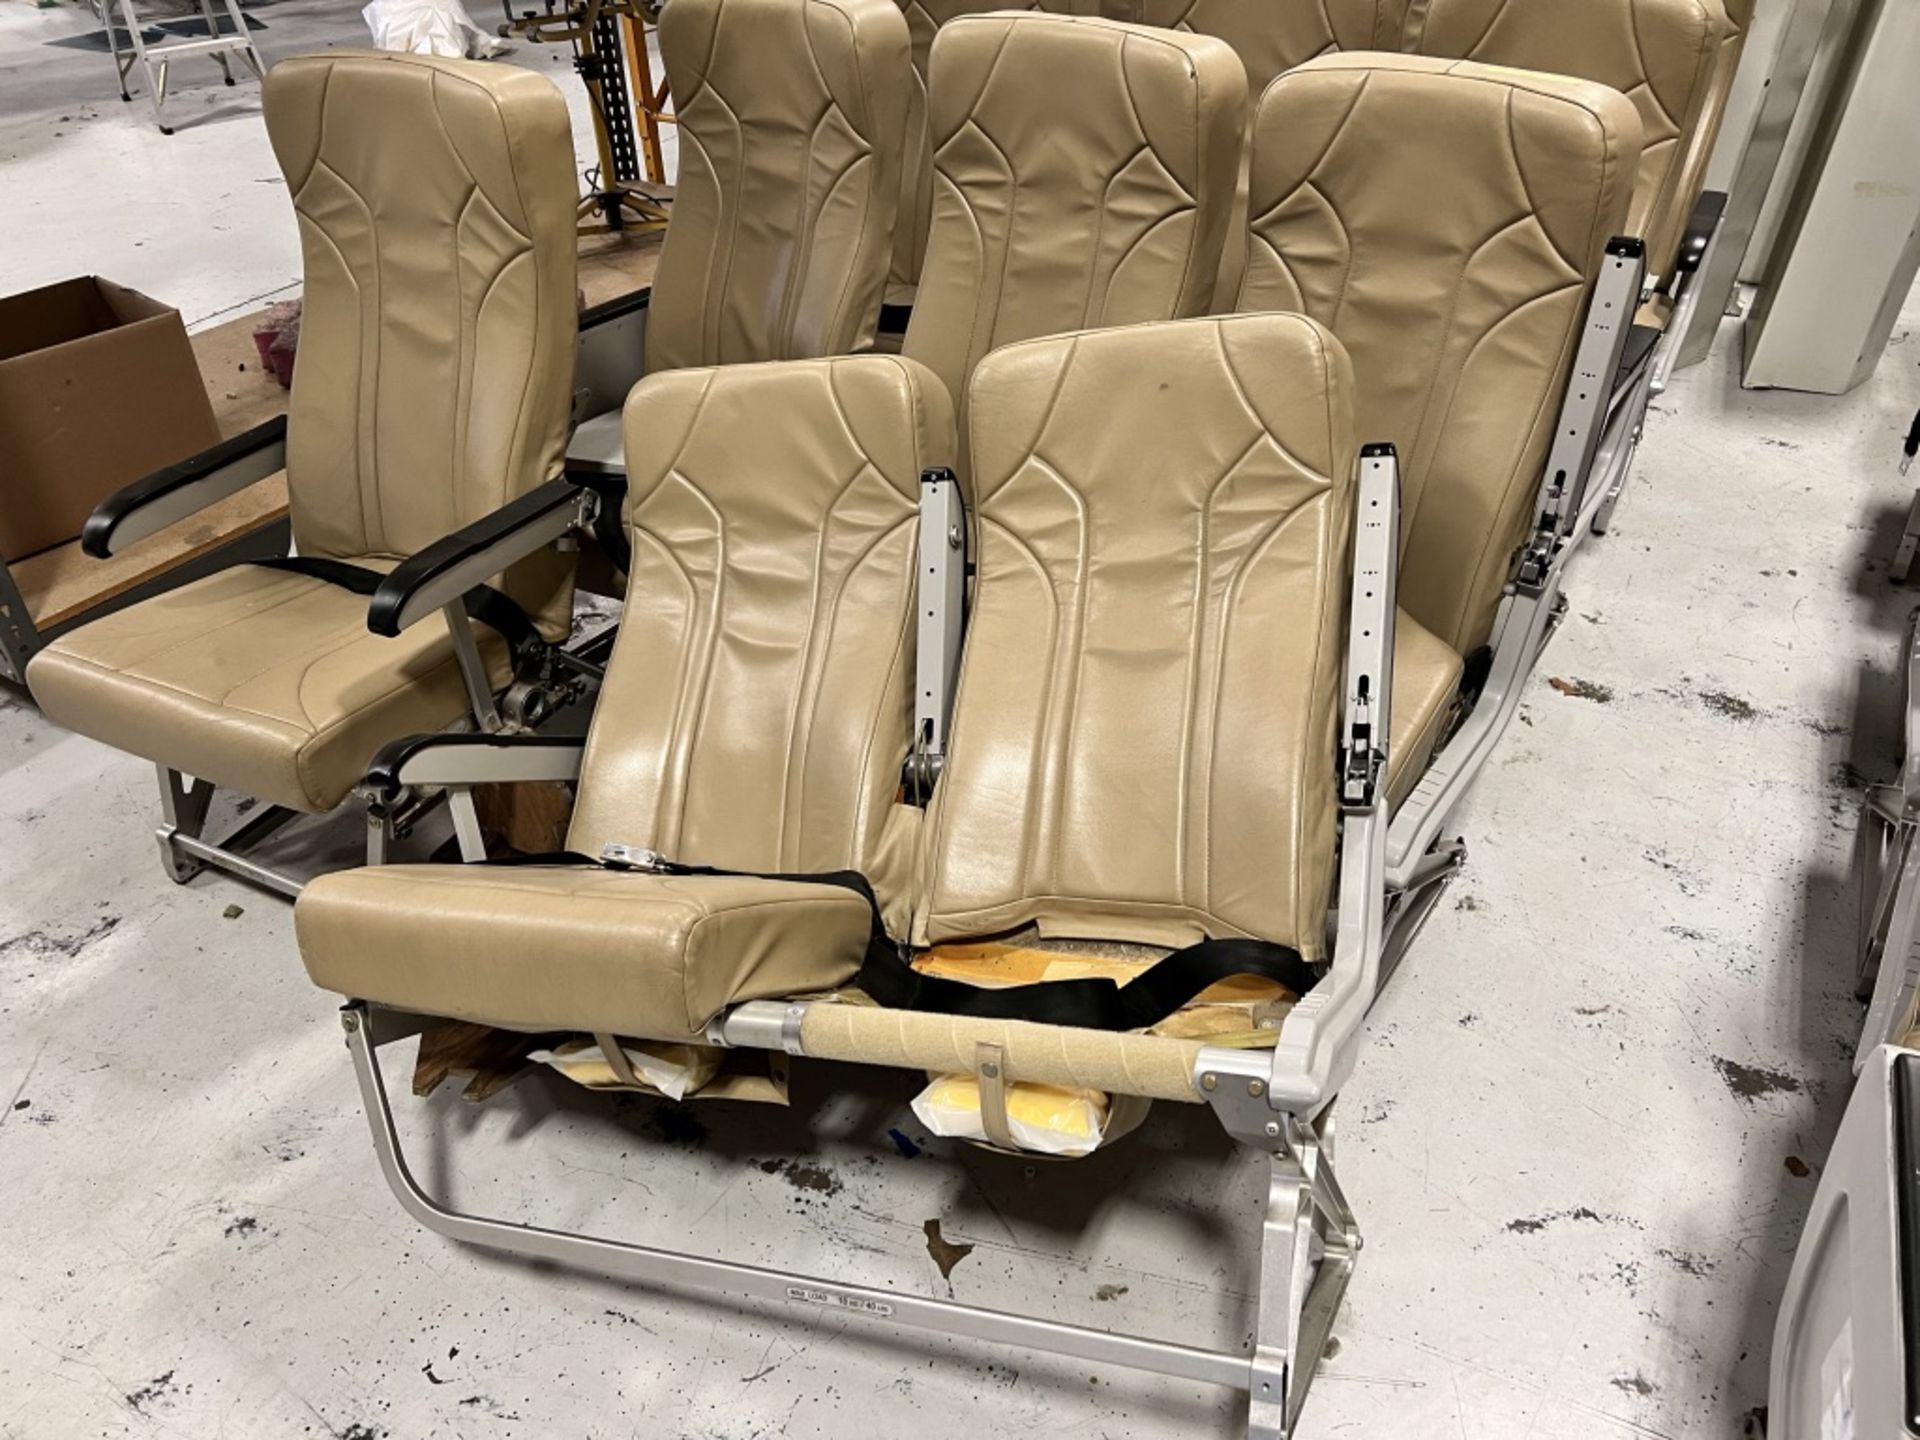 LOT OF: (30) SEATS, (1) FLIGHT ATTENDANT SEAT/ JUMP SEAT, (7) OVERHEAD LUGGAGE COMPARTMENTS AND (1) - Image 3 of 21